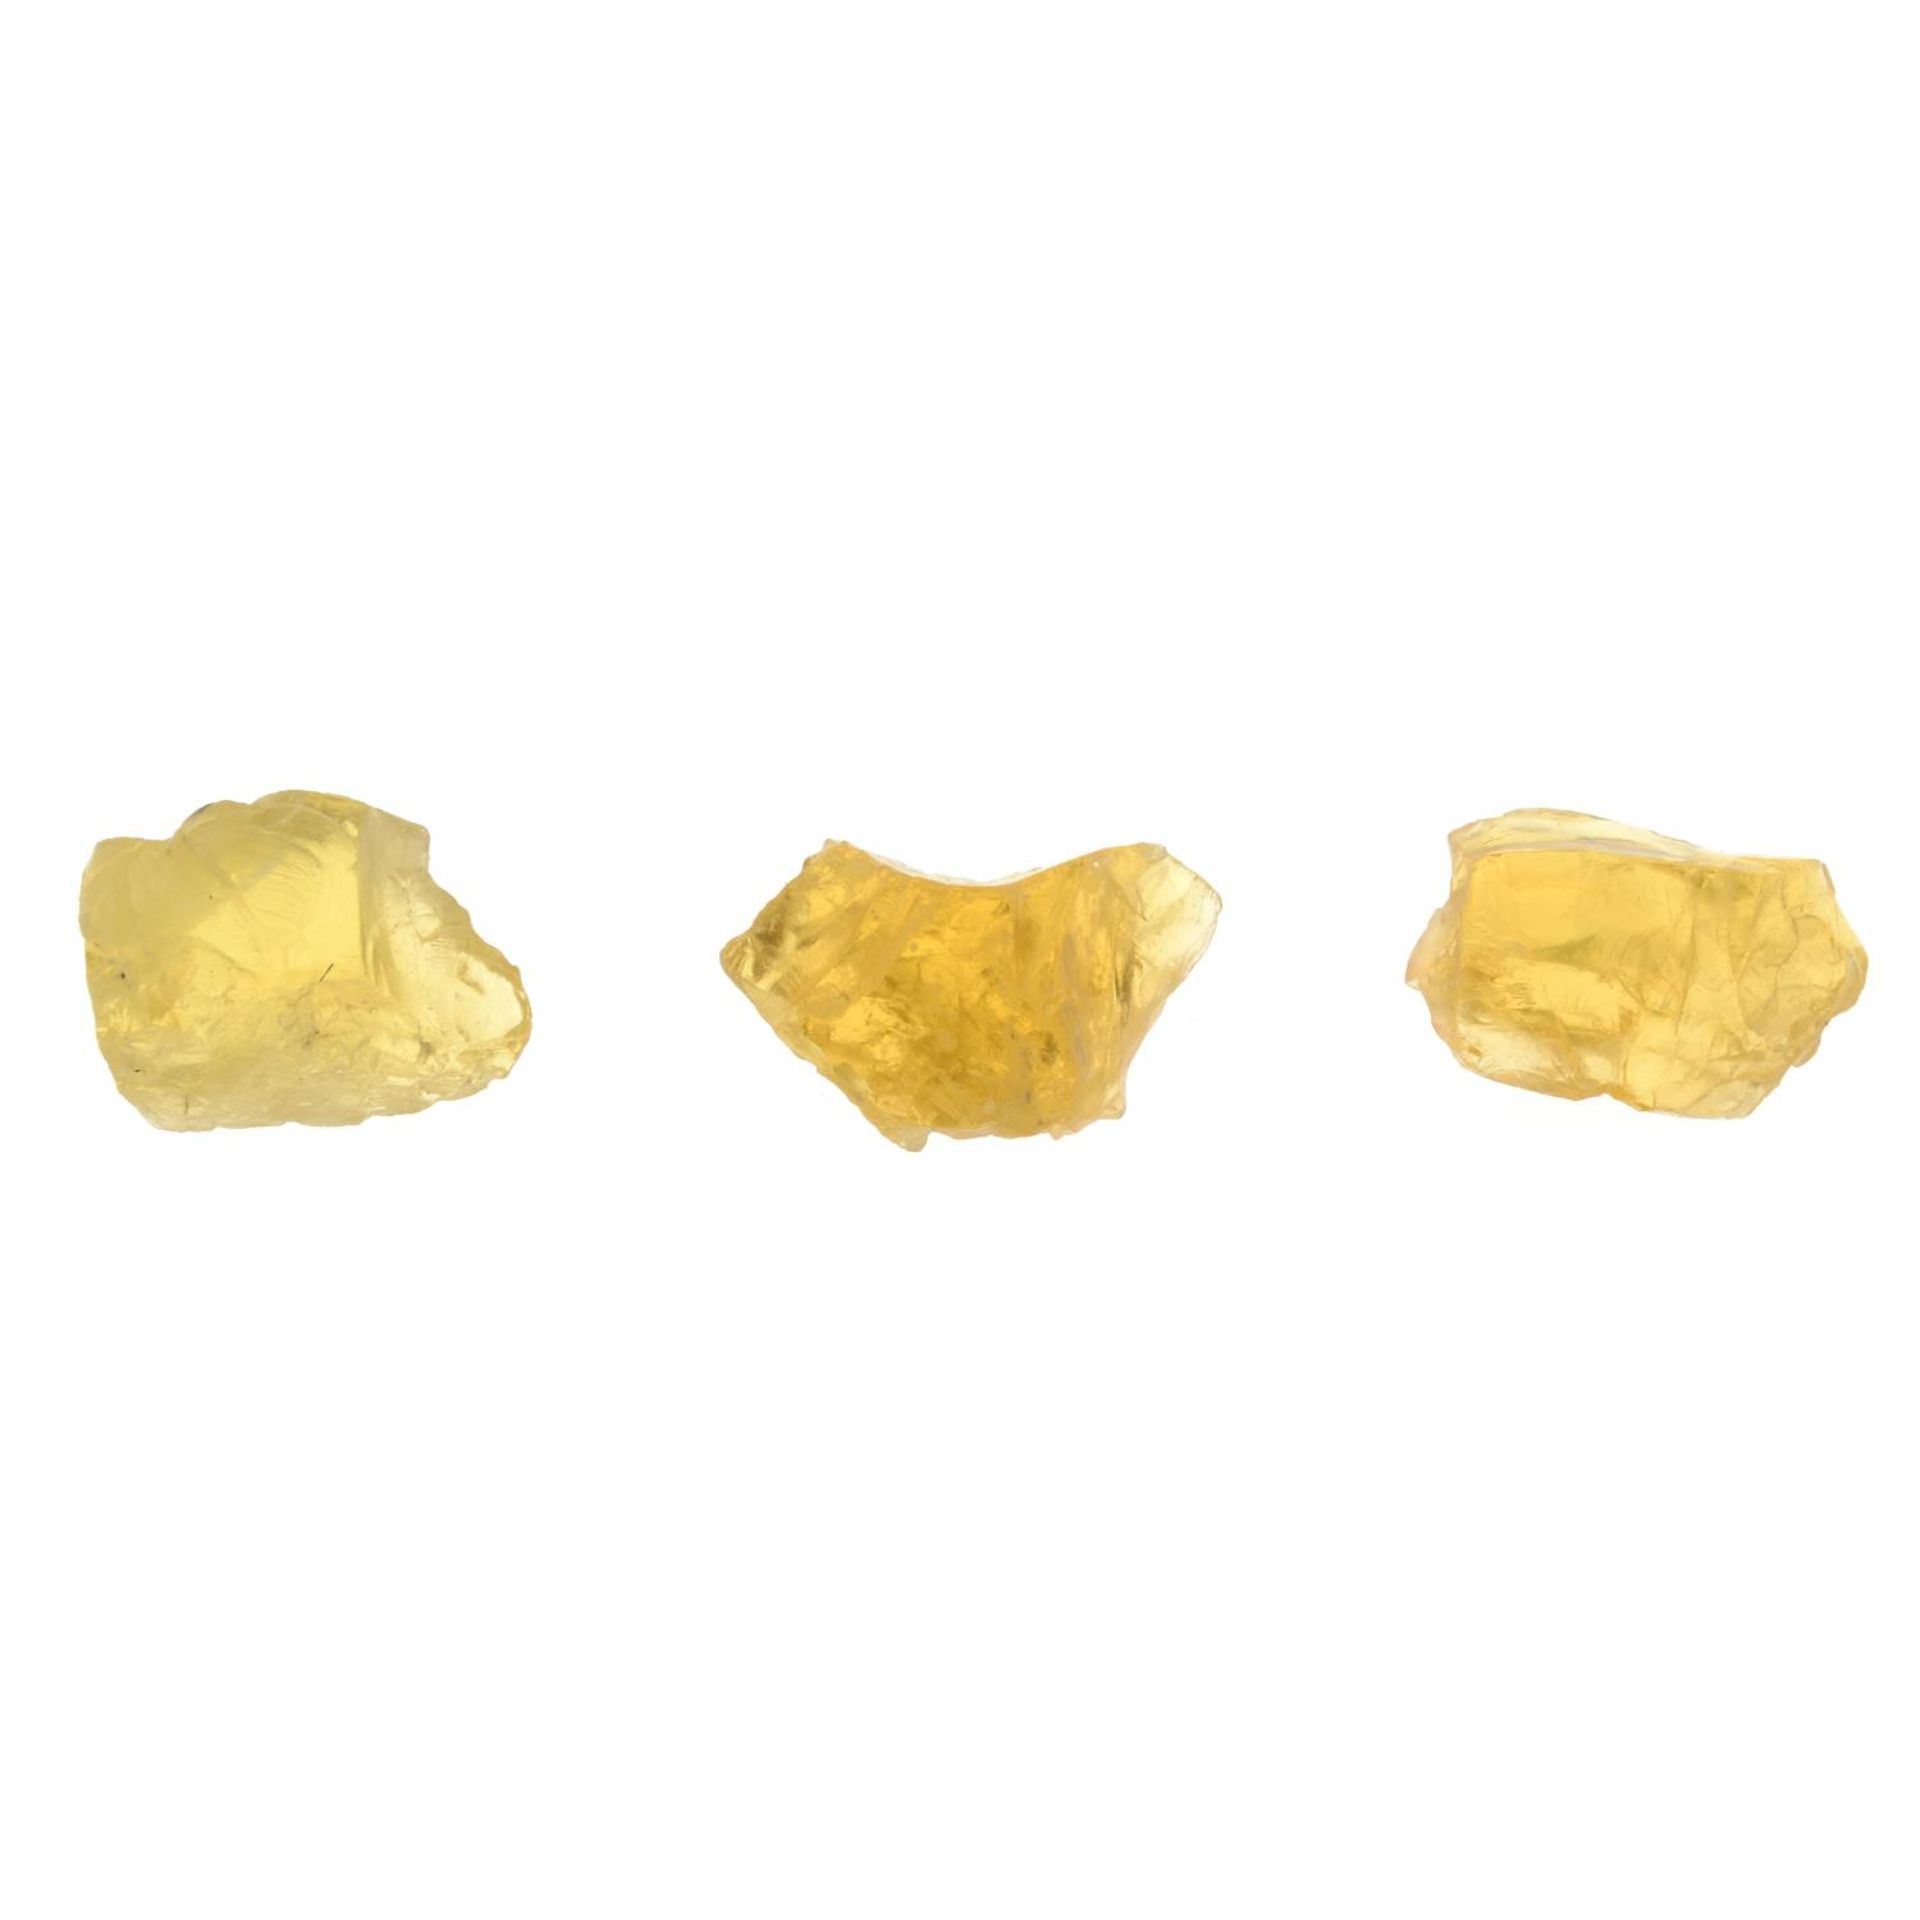 A small selection of rough yellow beryl.